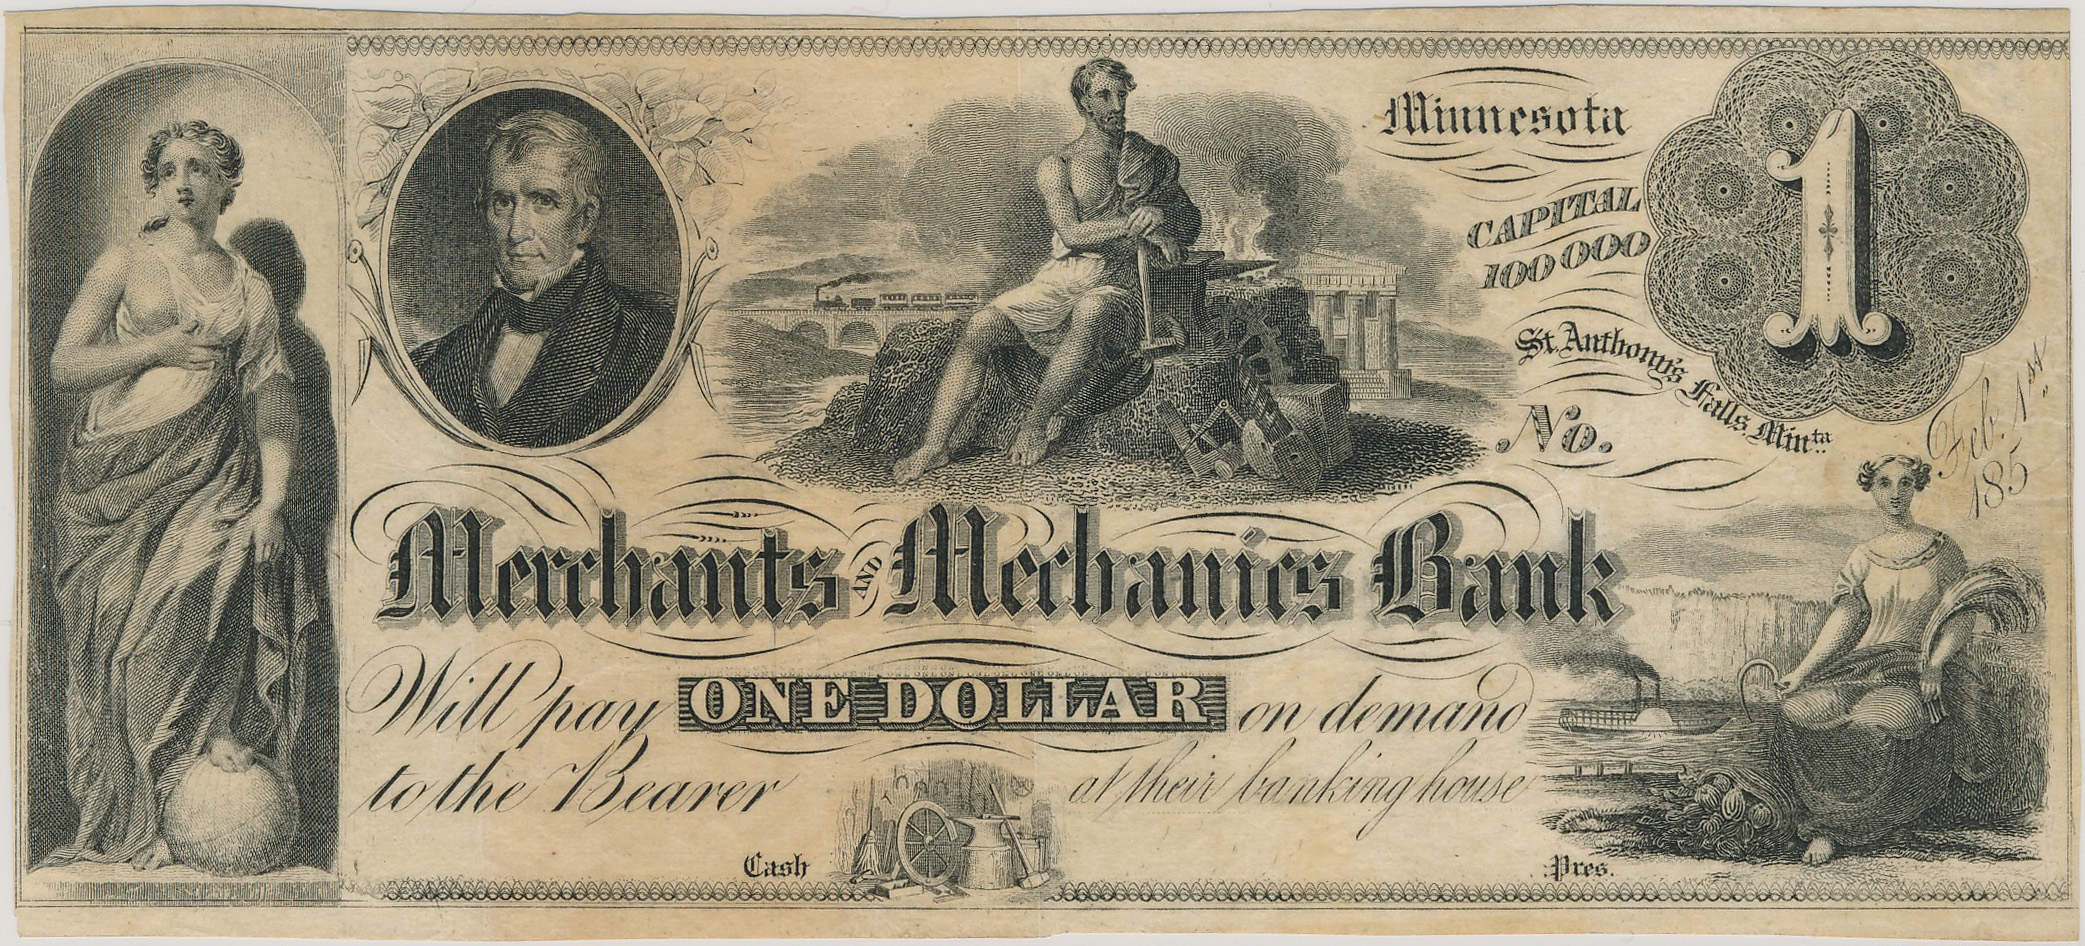 $1 Merchants and Mechanics Bank (at their banking house)